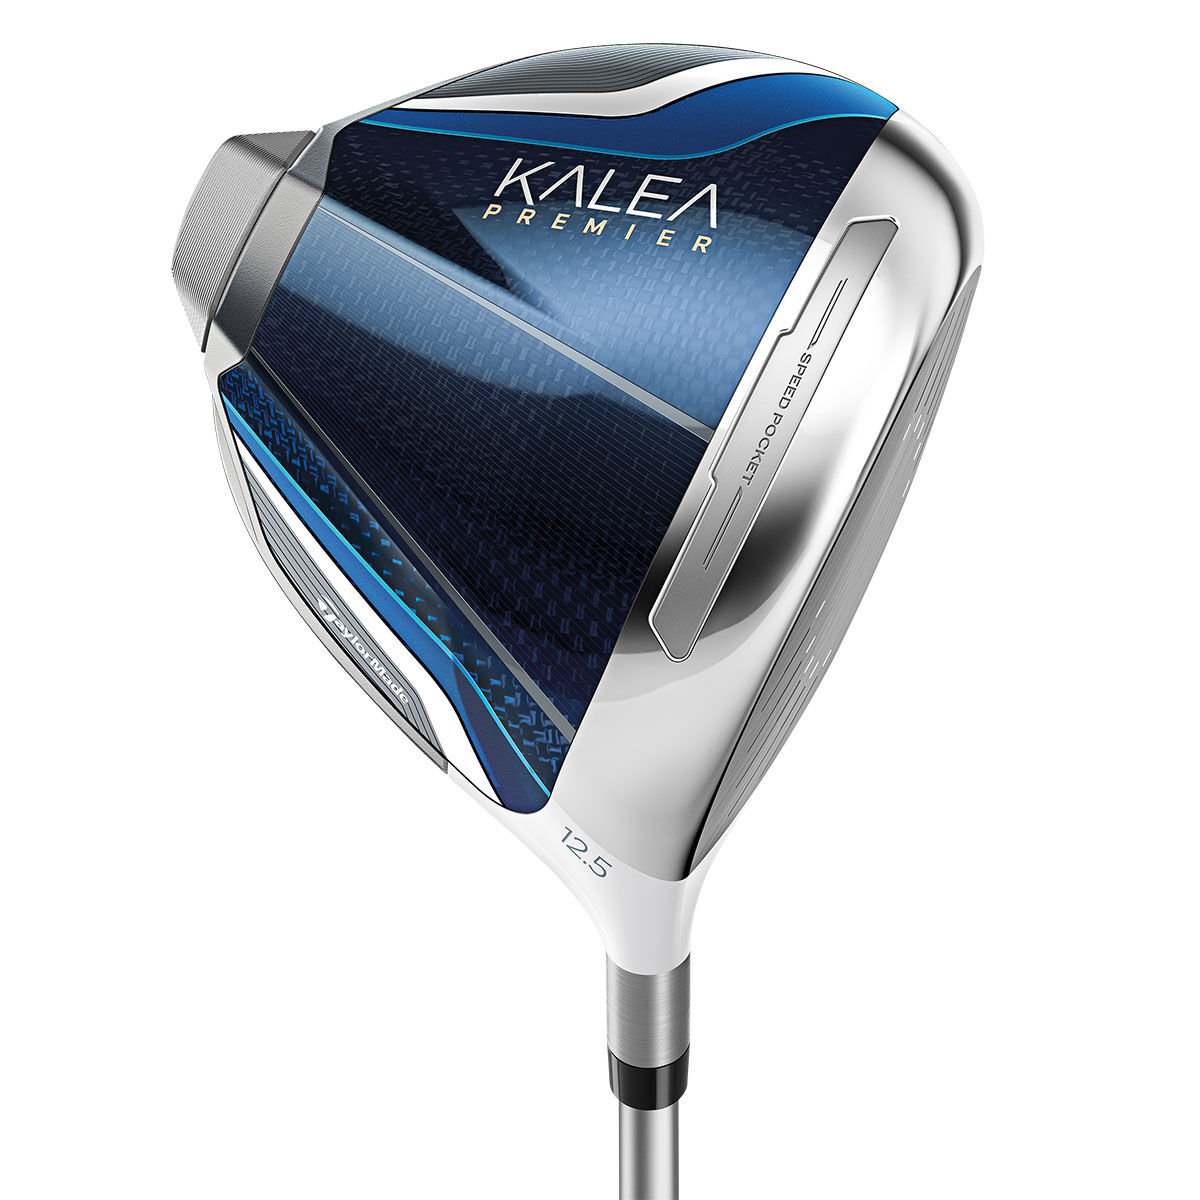 TaylorMade Silver and Blue Lightweight Women's Kalea Premier Custom Fit Golf Driver | American Golf, One Size von TaylorMade